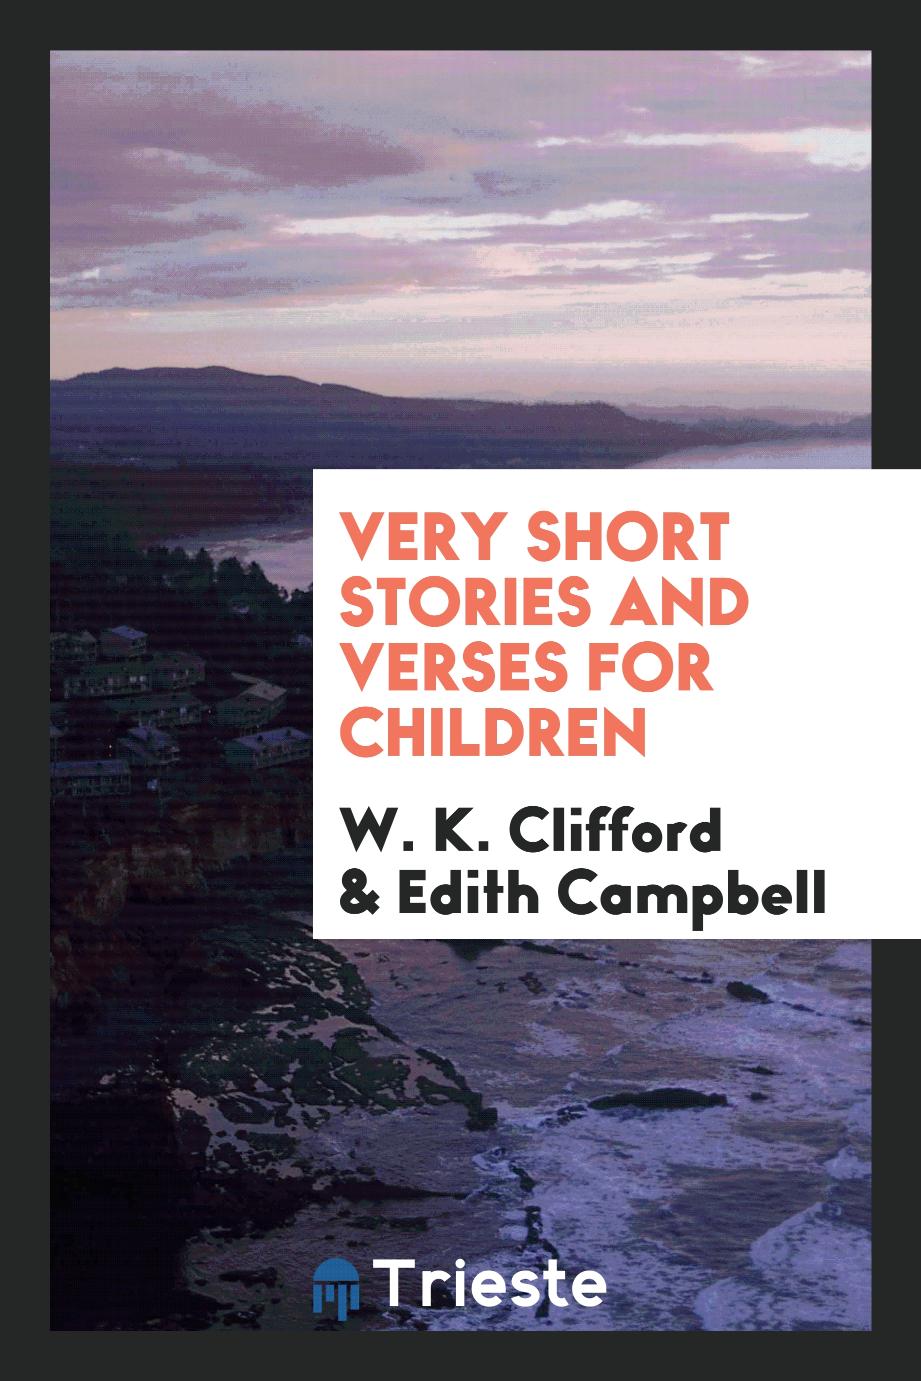 Very short stories and verses for children